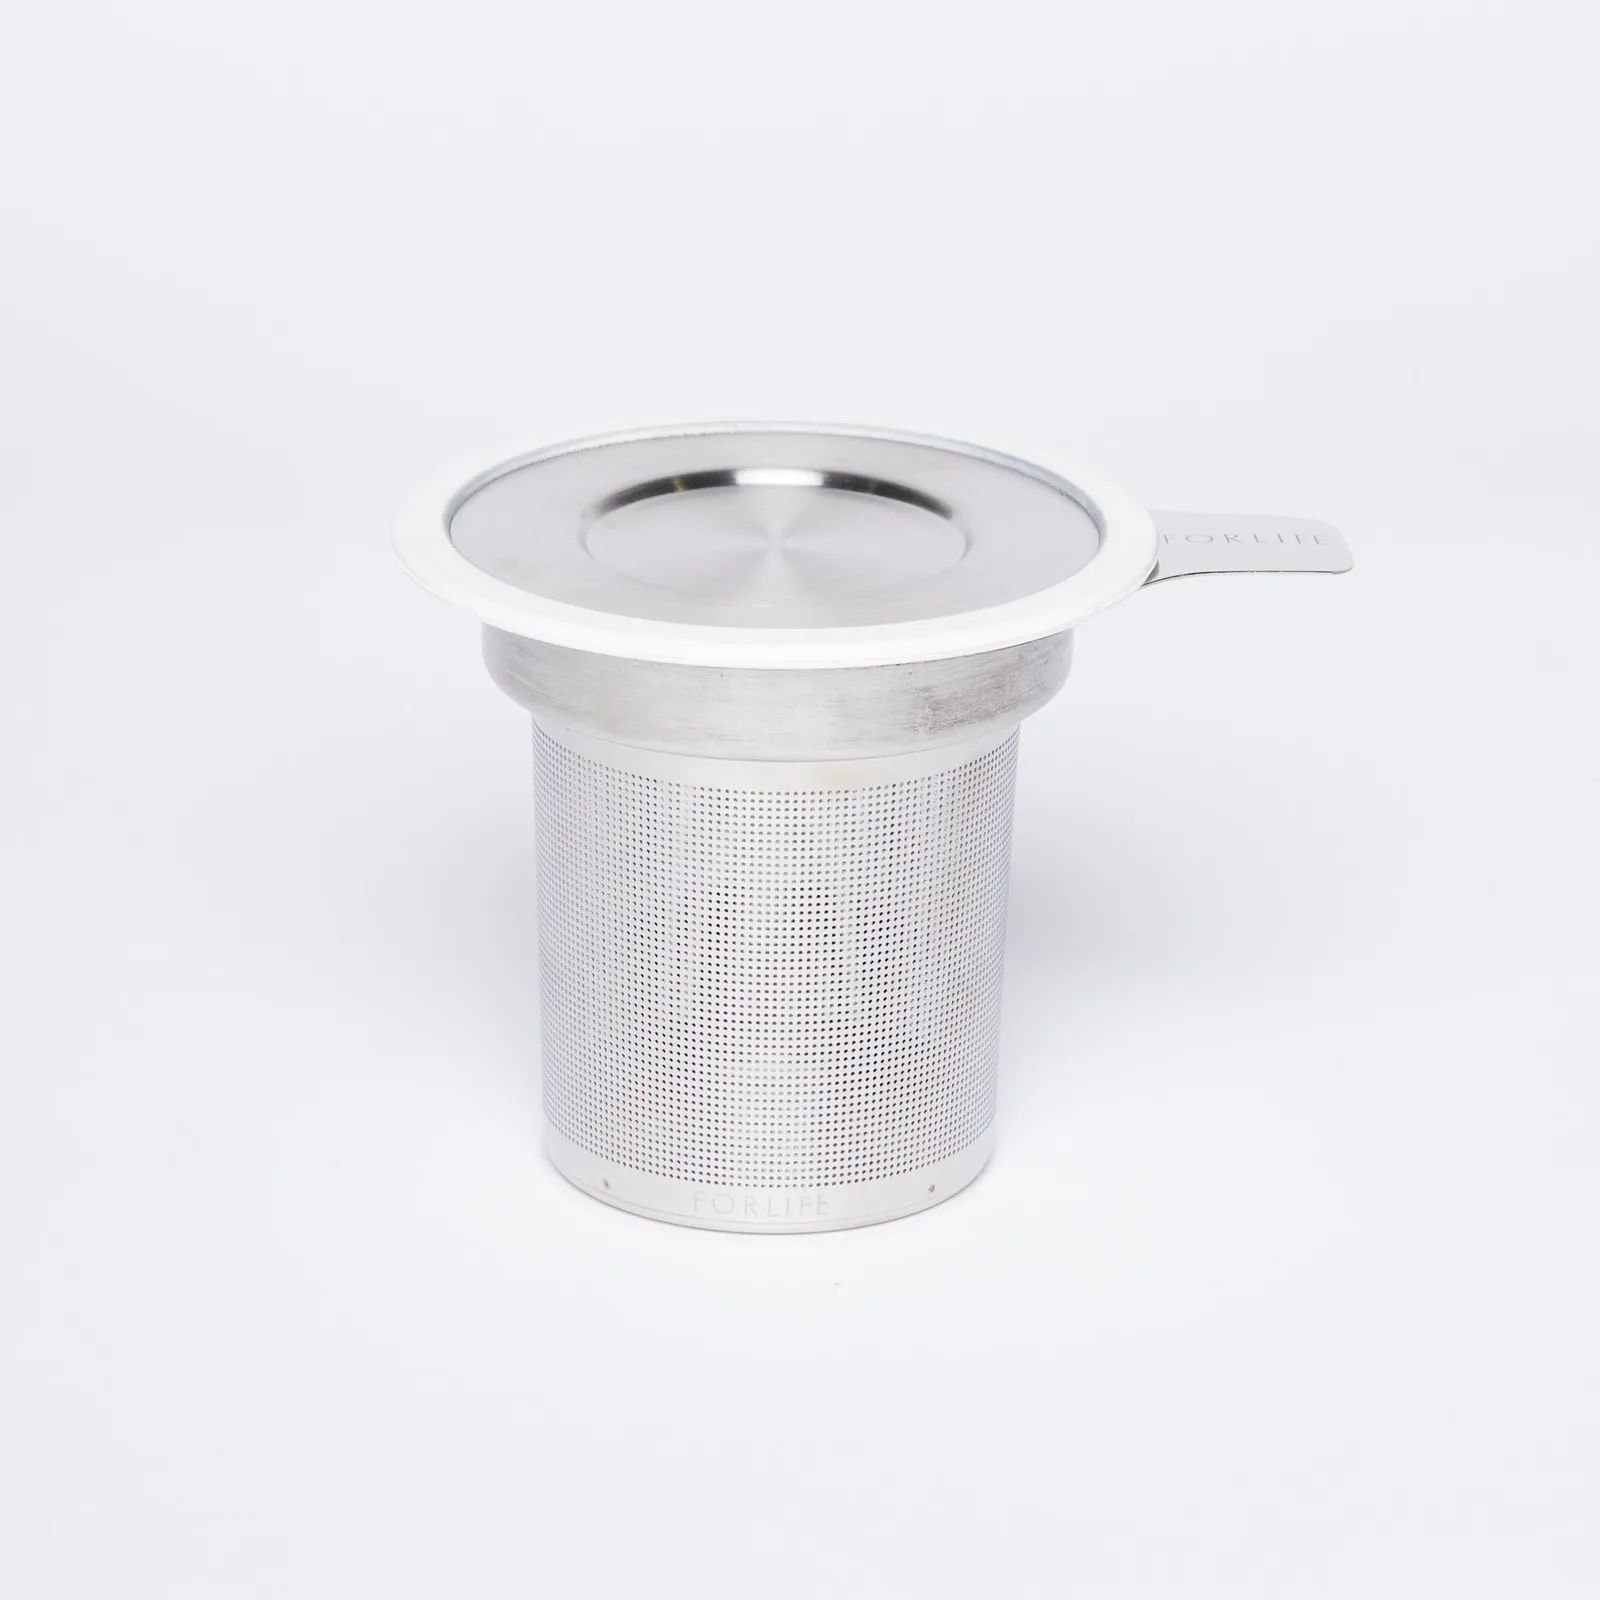 A stainless steel strainer that fits into the East Fork Big Mug